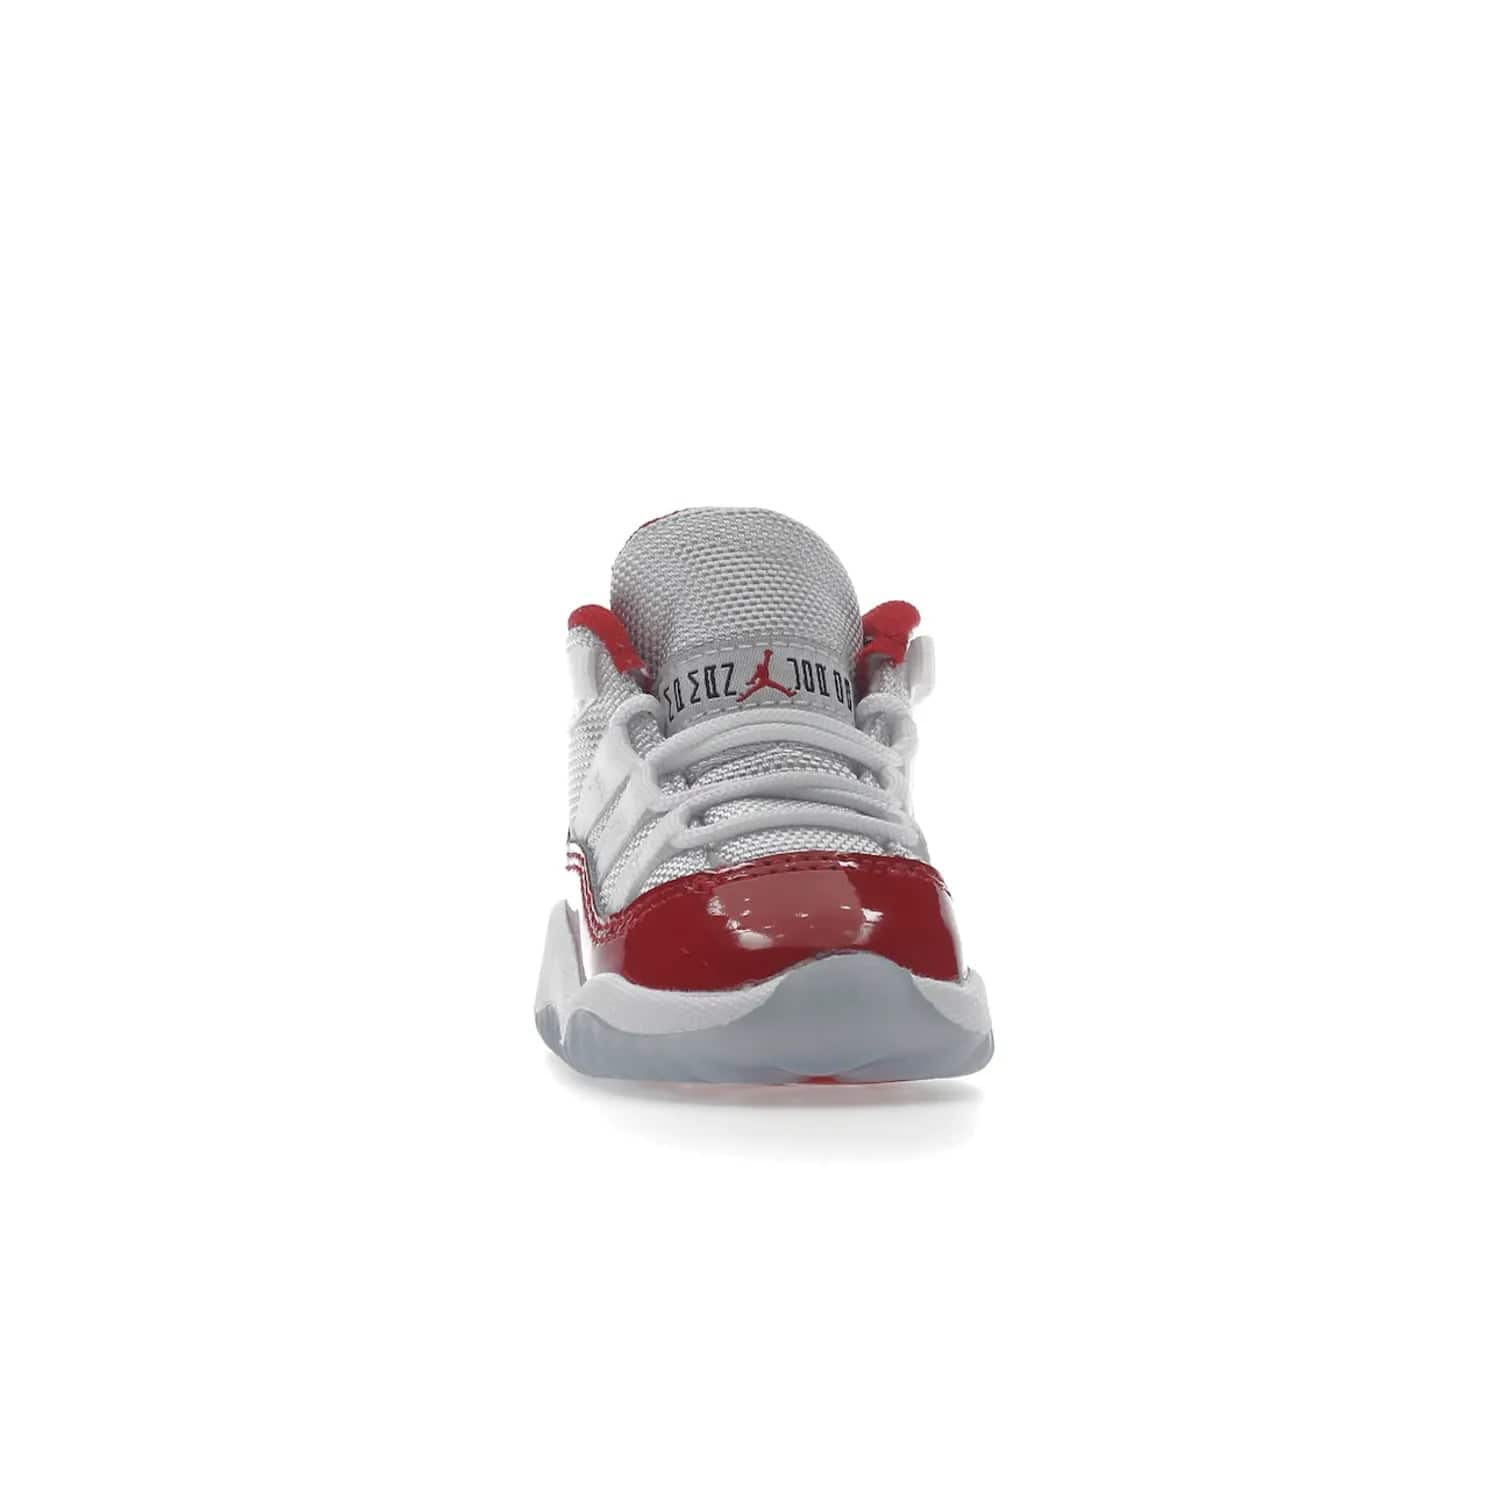 Jordan 11 Retro Cherry (2022) (TD) - Image 9 - Only at www.BallersClubKickz.com - Timeless classic. Air Jordan 11 Retro Cherry 2022 TD combines mesh, leather & suede for a unique look. White upper with varsity red suede. Jumpman logo on collar & tongue. Available Dec 10th, priced at $80.